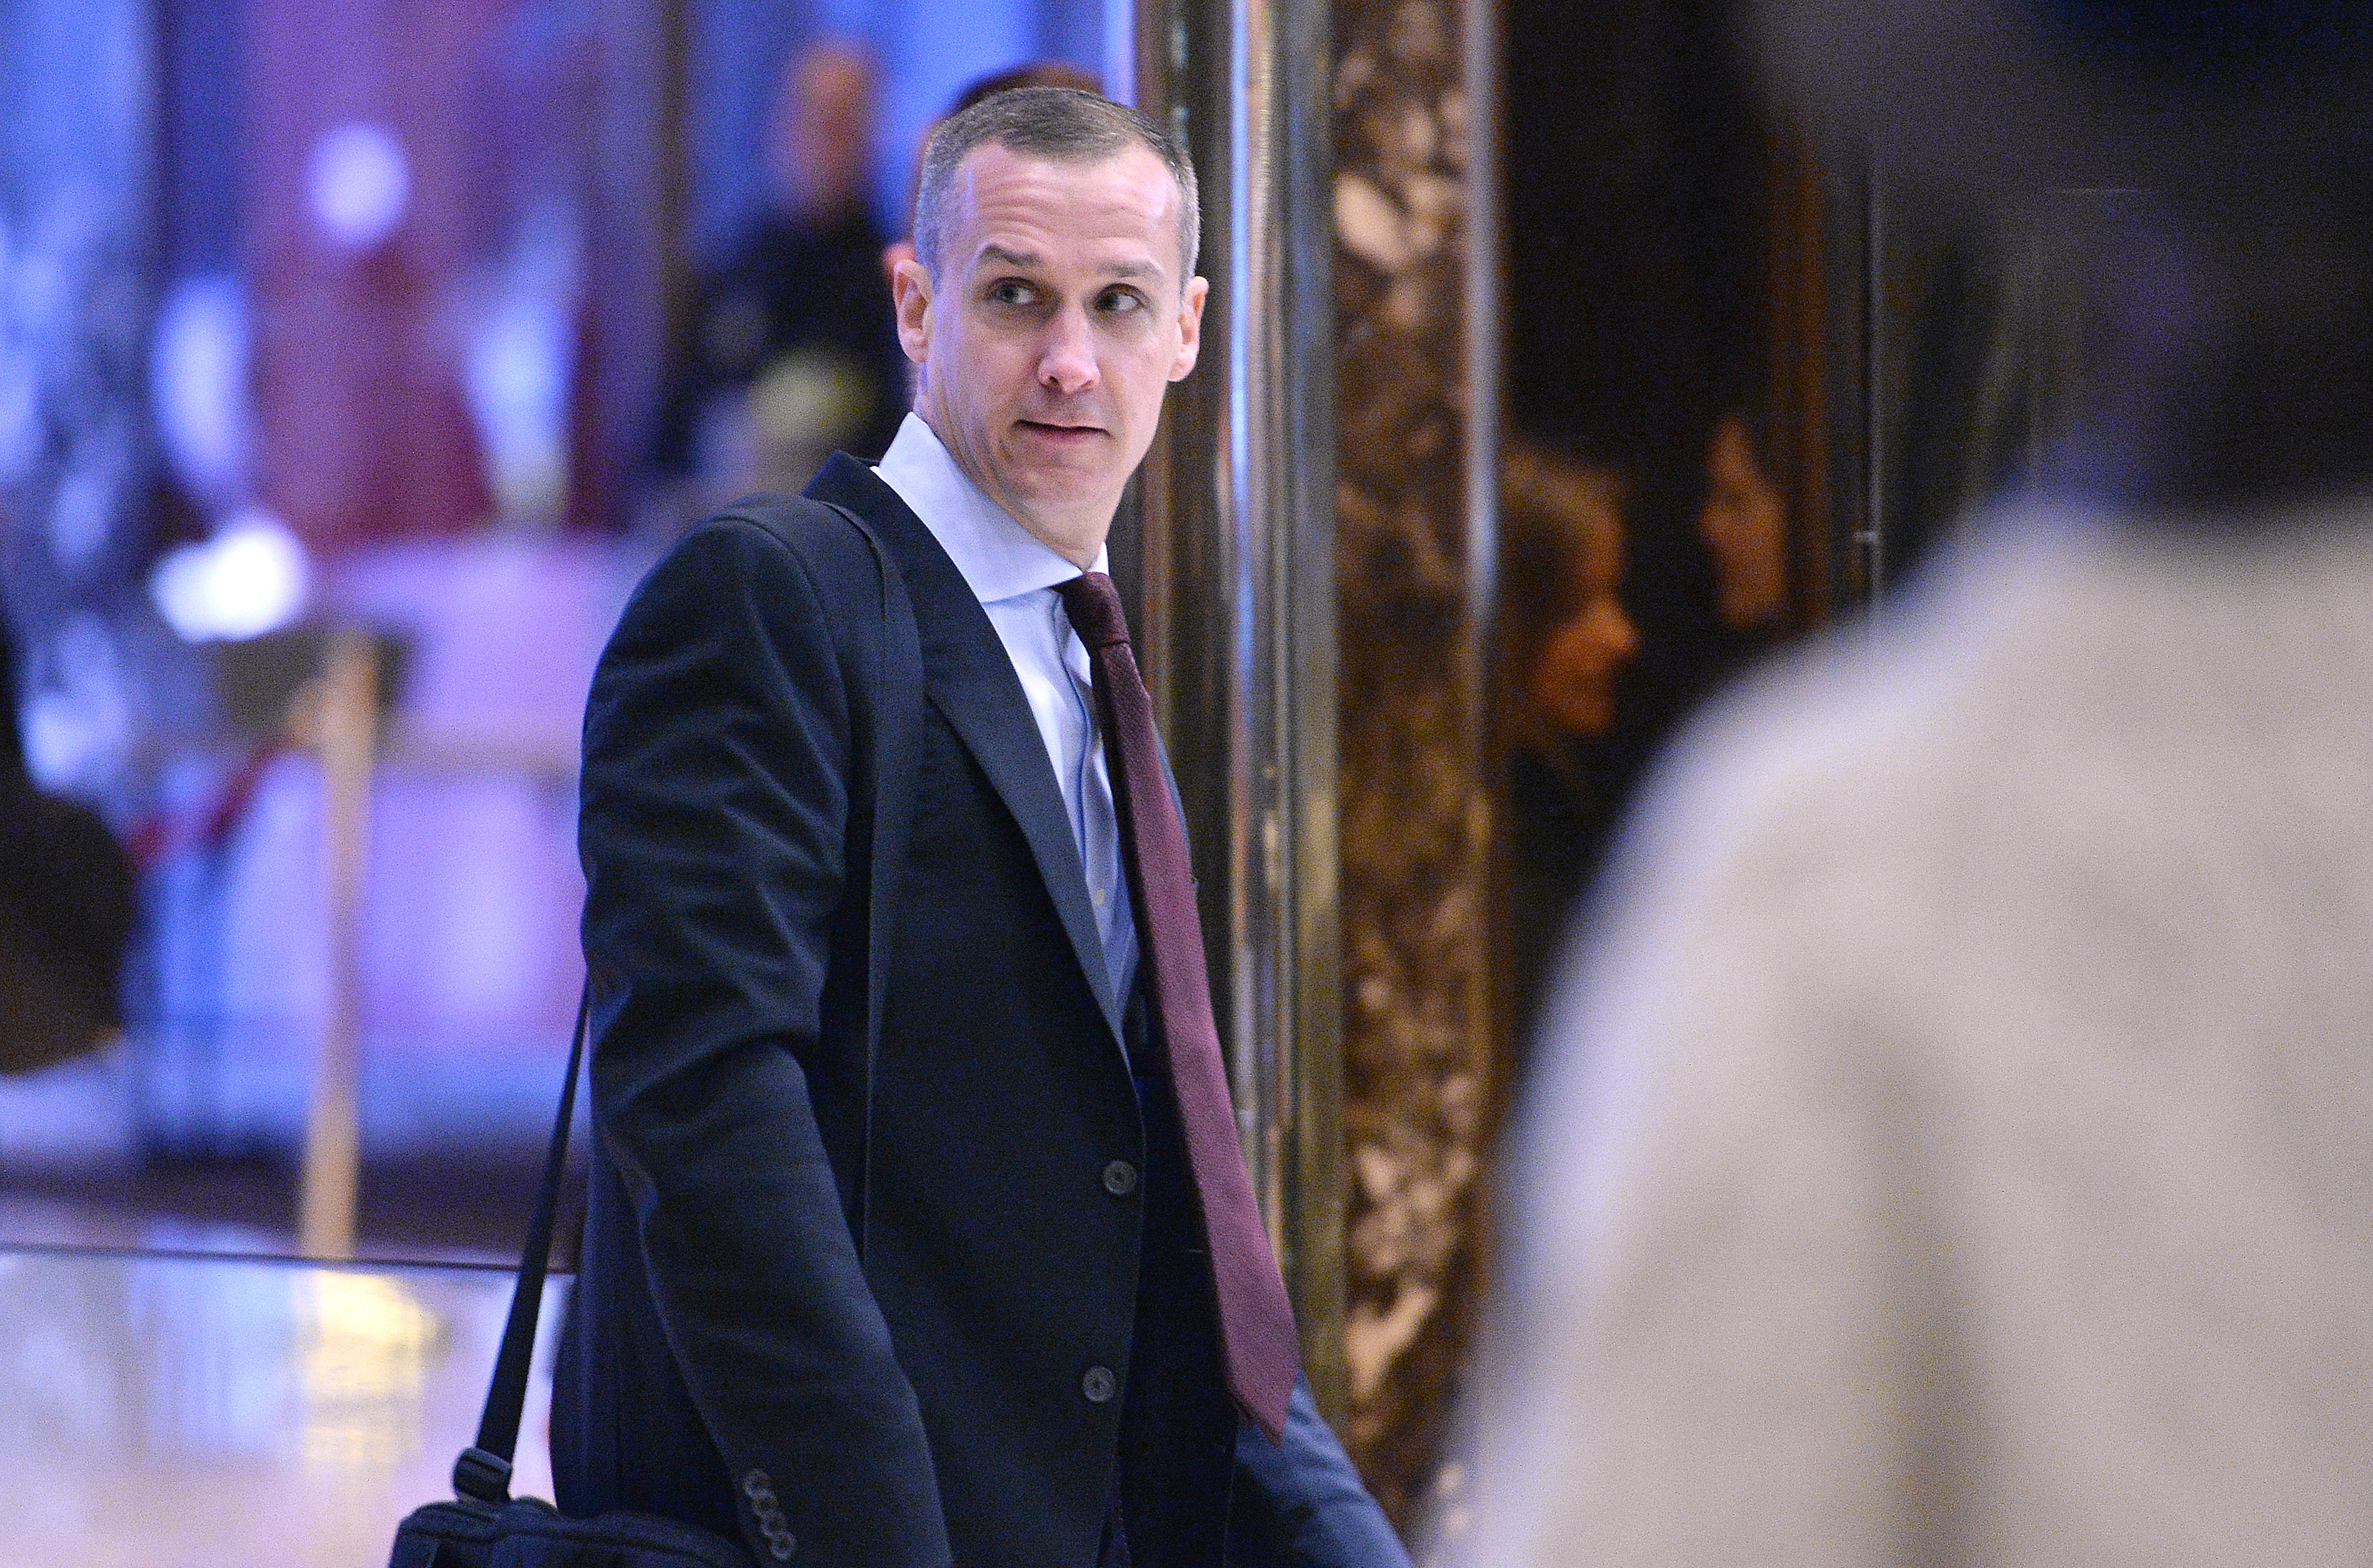 Corey Lewandowski, former campaign manager for U.S. President-elect Donald Trump, arrives at Trump Tower in New York, U.S., on Monday, Nov. 28, 2016. Trump is considering retired General David Petraeus to be secretary of state and plans to meet with the former CIA director Monday in New York, according to a senior official with the transition. Photographer: Anthony Behar/Pool via Bloomberg (Bloomberg&mdash;Bloomberg via Getty Images)